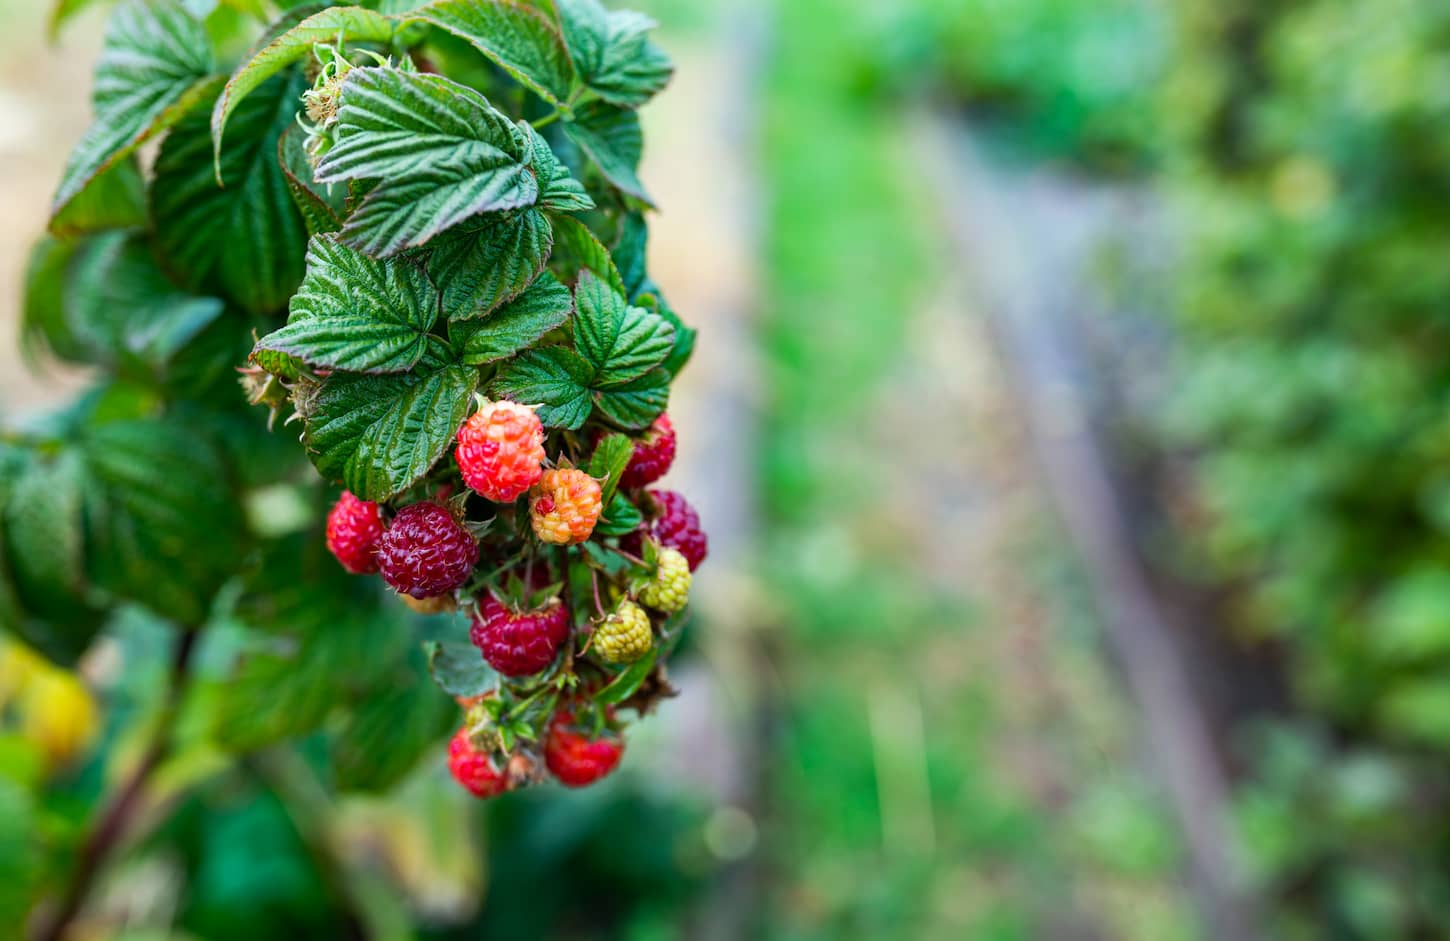 An image of a bush of green leaves and a bunch of pink and yellow raspberry berries ripening in an orchard under bright warm sun rays closeup.